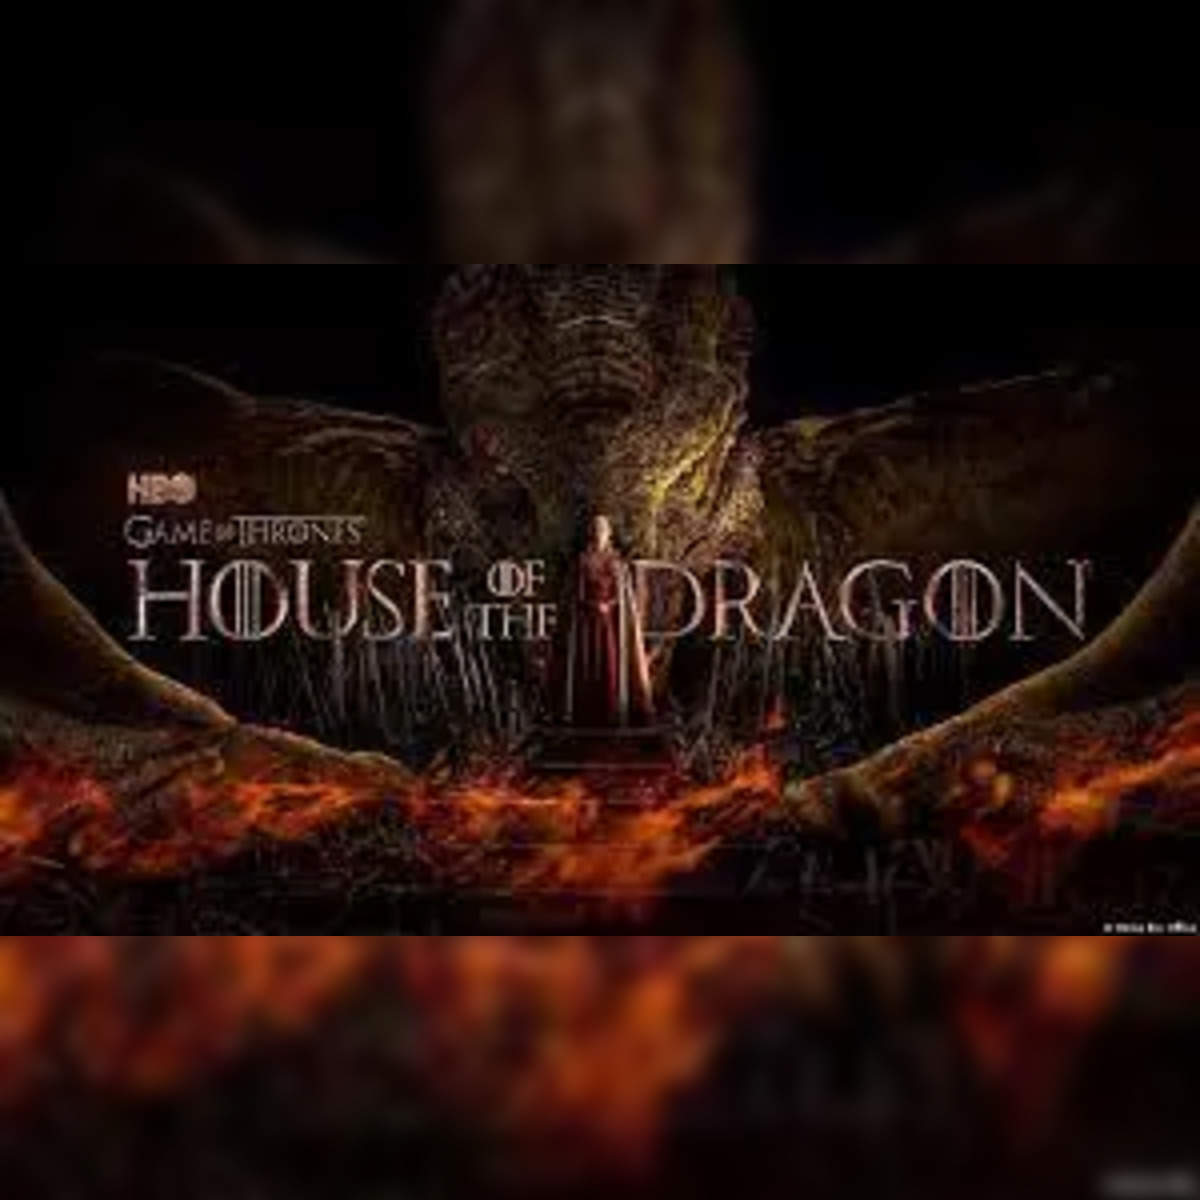 HOUSE OF THE DRAGON: EVERYTHING ABOUT THE SEASON 2 